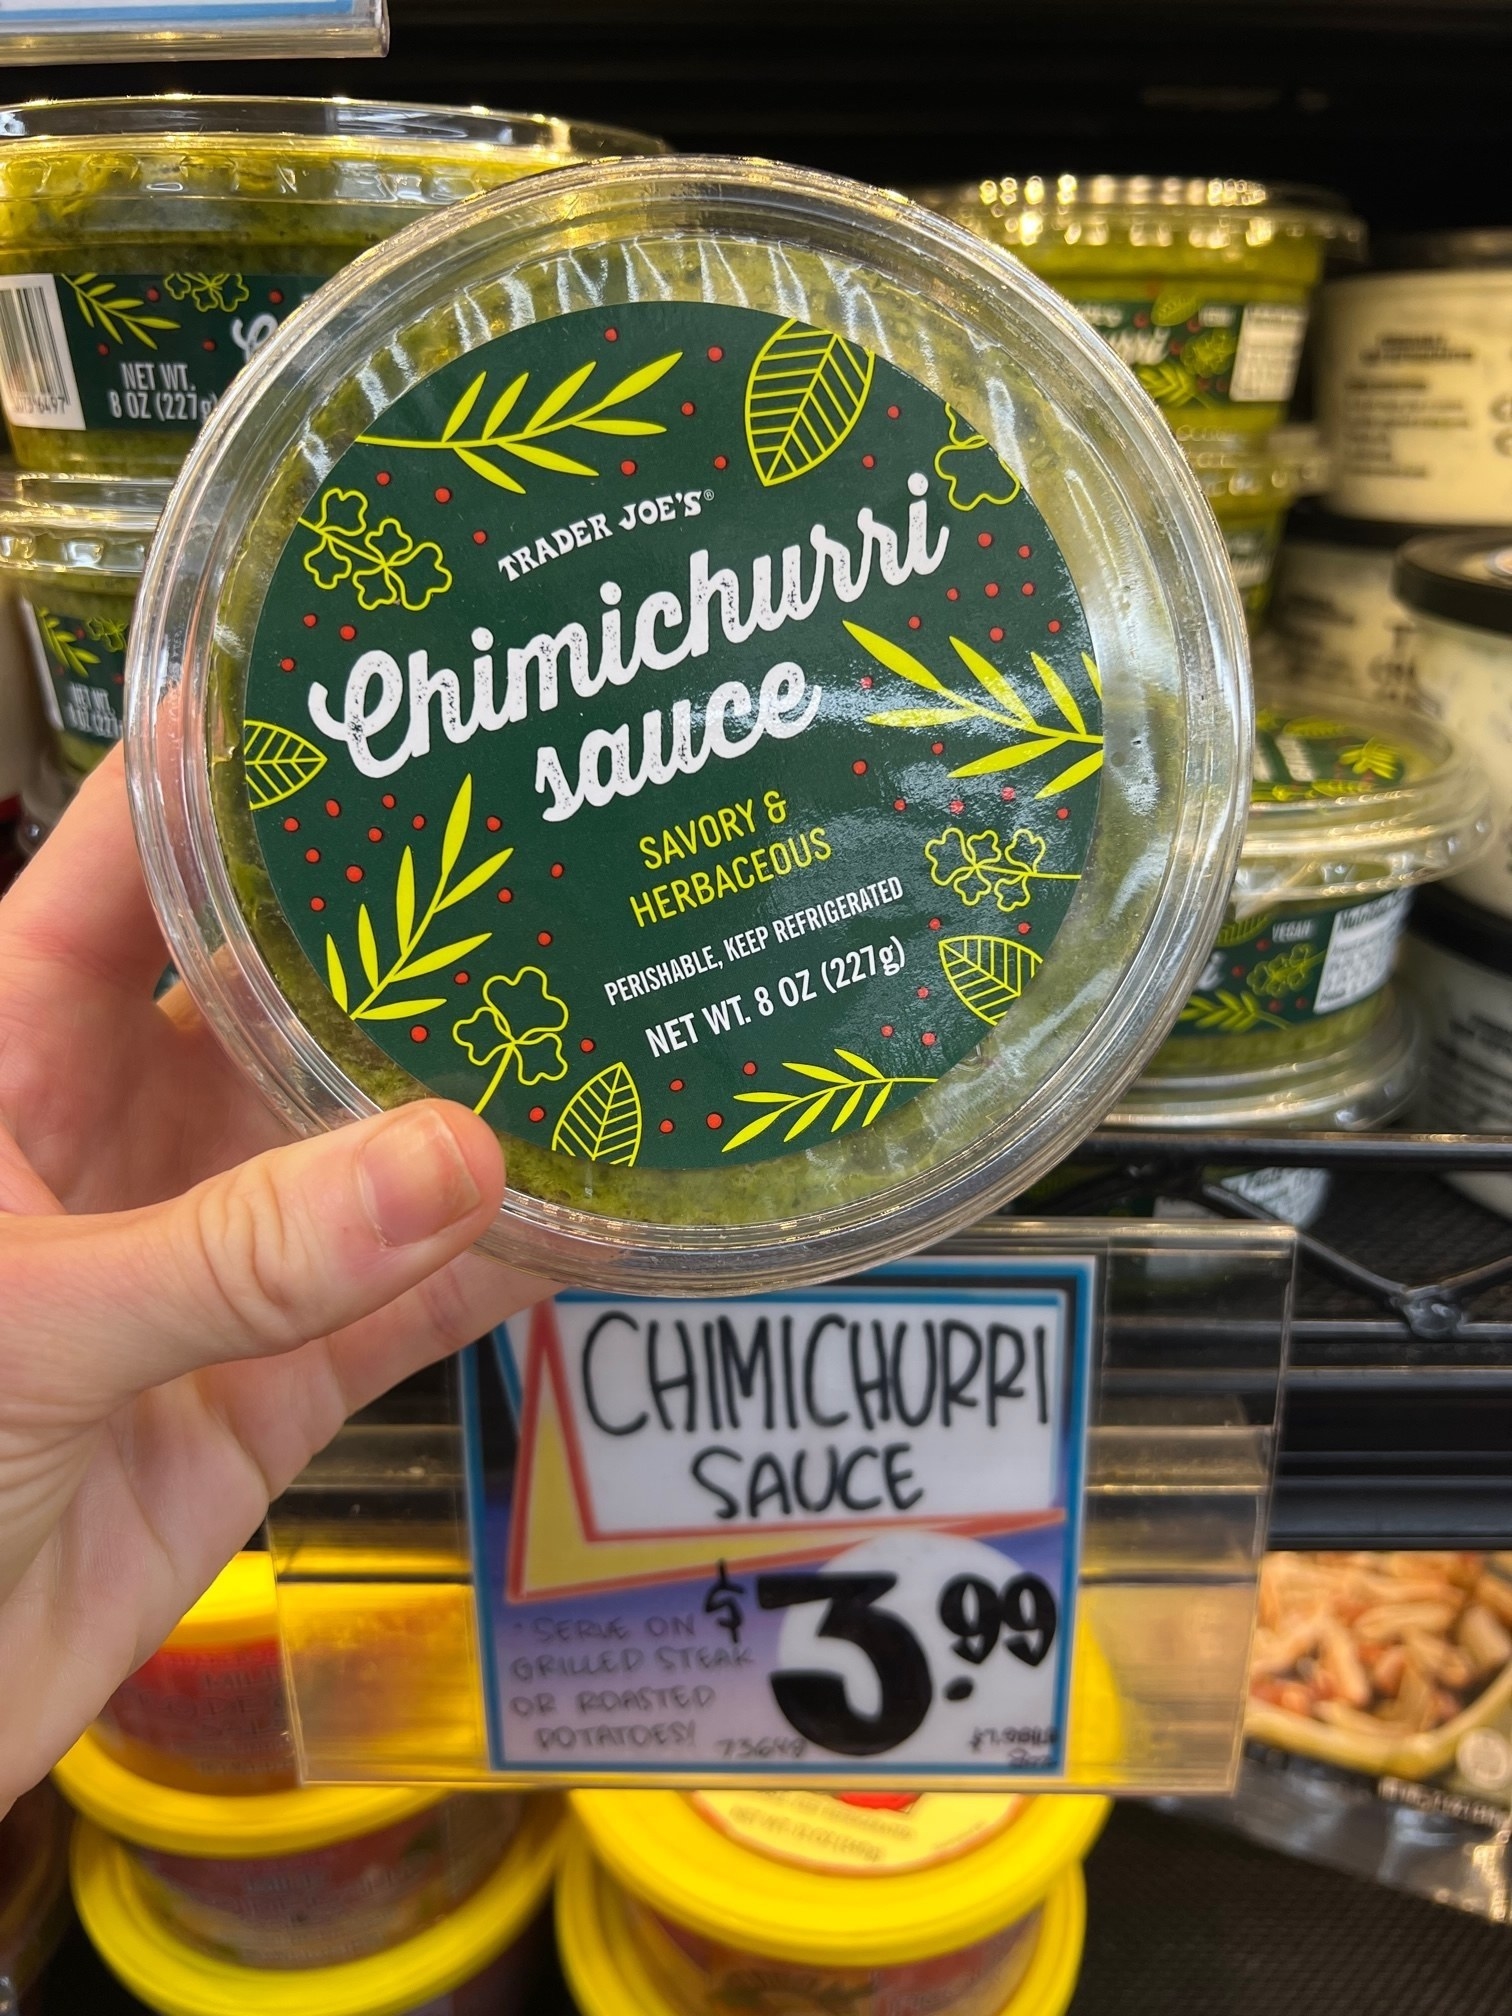 A container of Chimichurri Sauce.